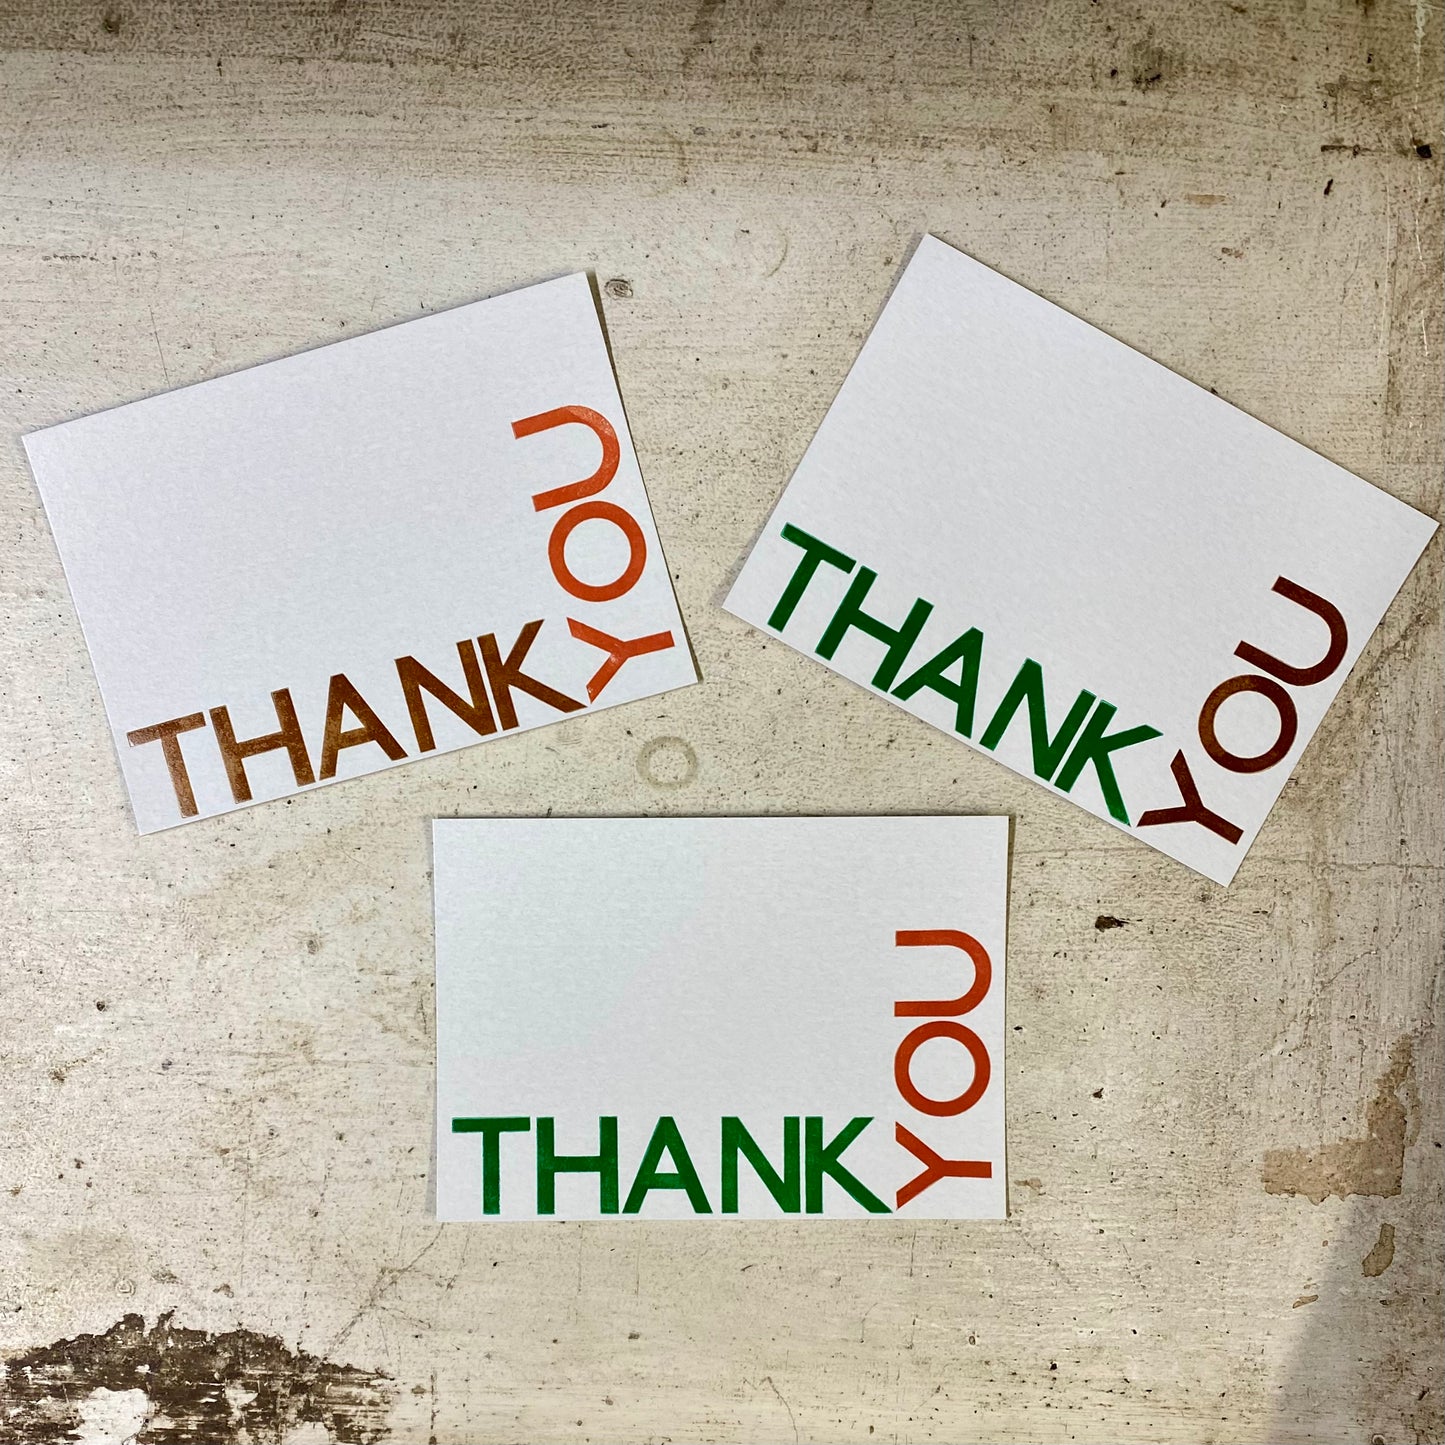 Thank you cards - printed with metal and wood type